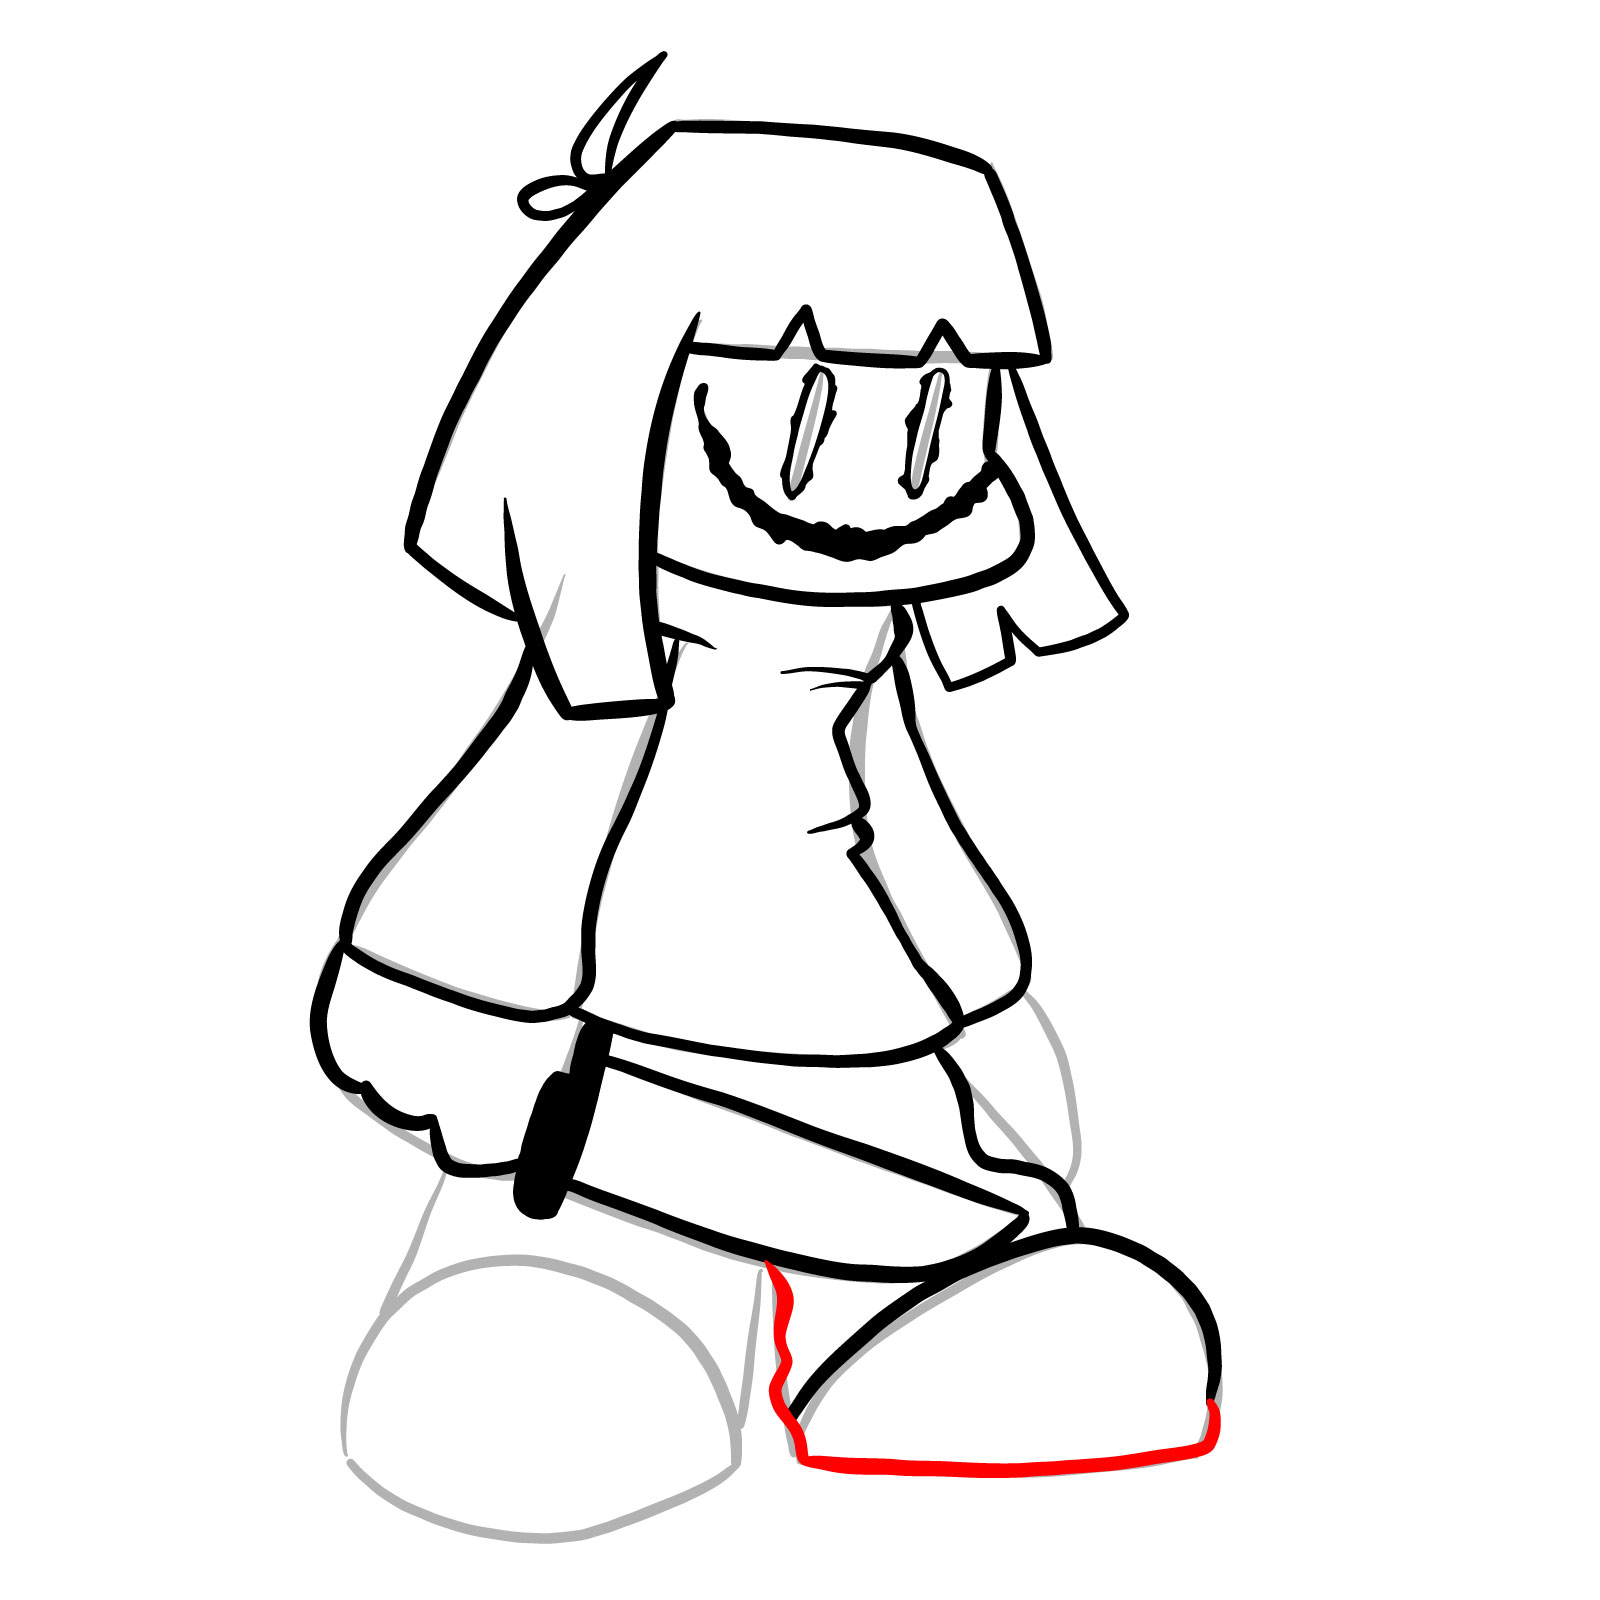 How to draw Chara from Friday Night Dustin' - step 18